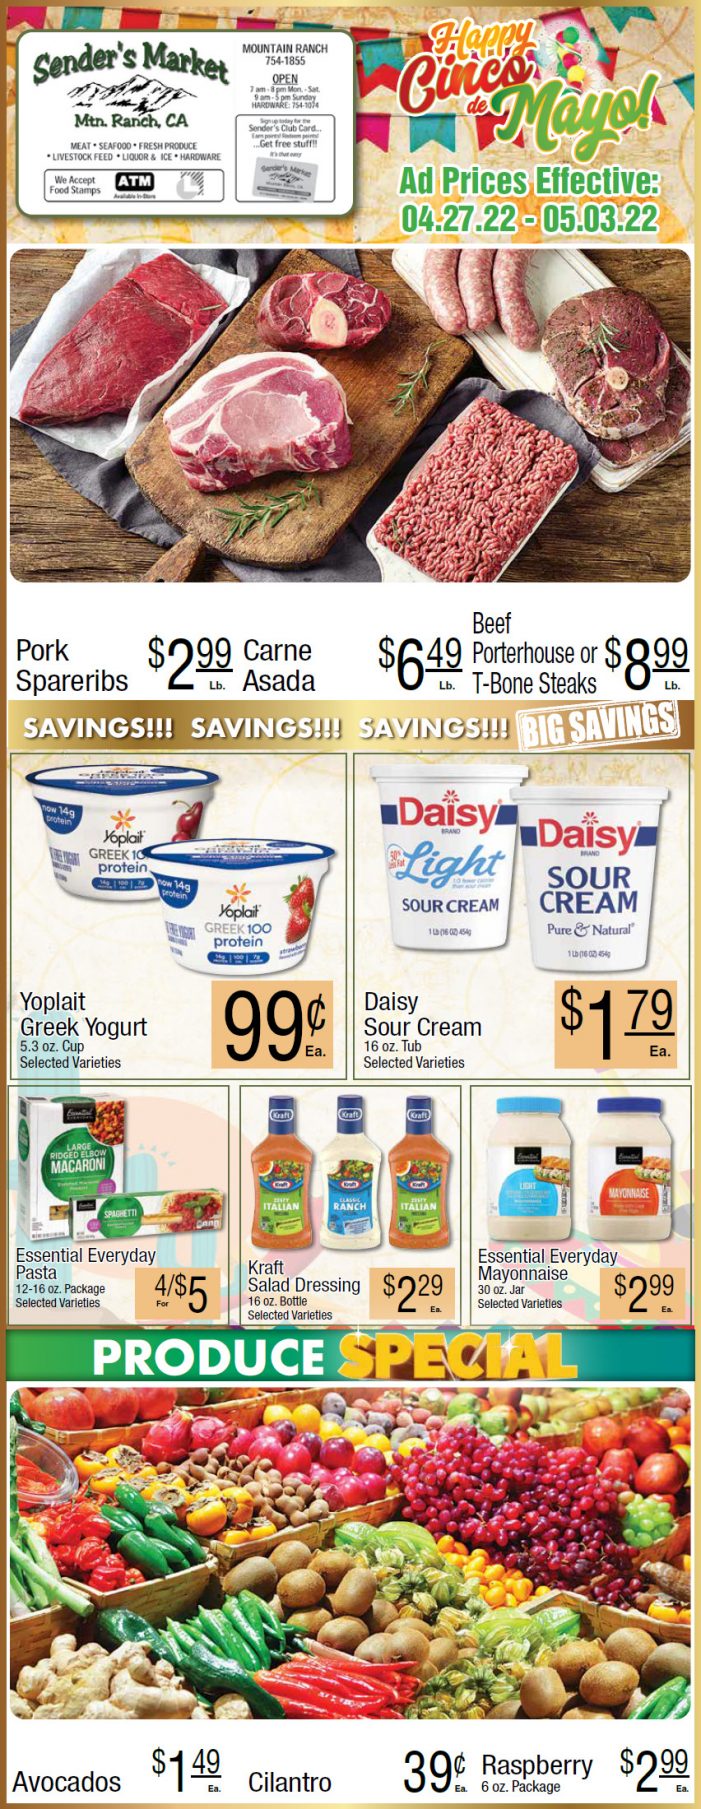 Sender’s Market Weekly Ad & Grocery Specials April 27th to May 3rd! Shop Local & Save!